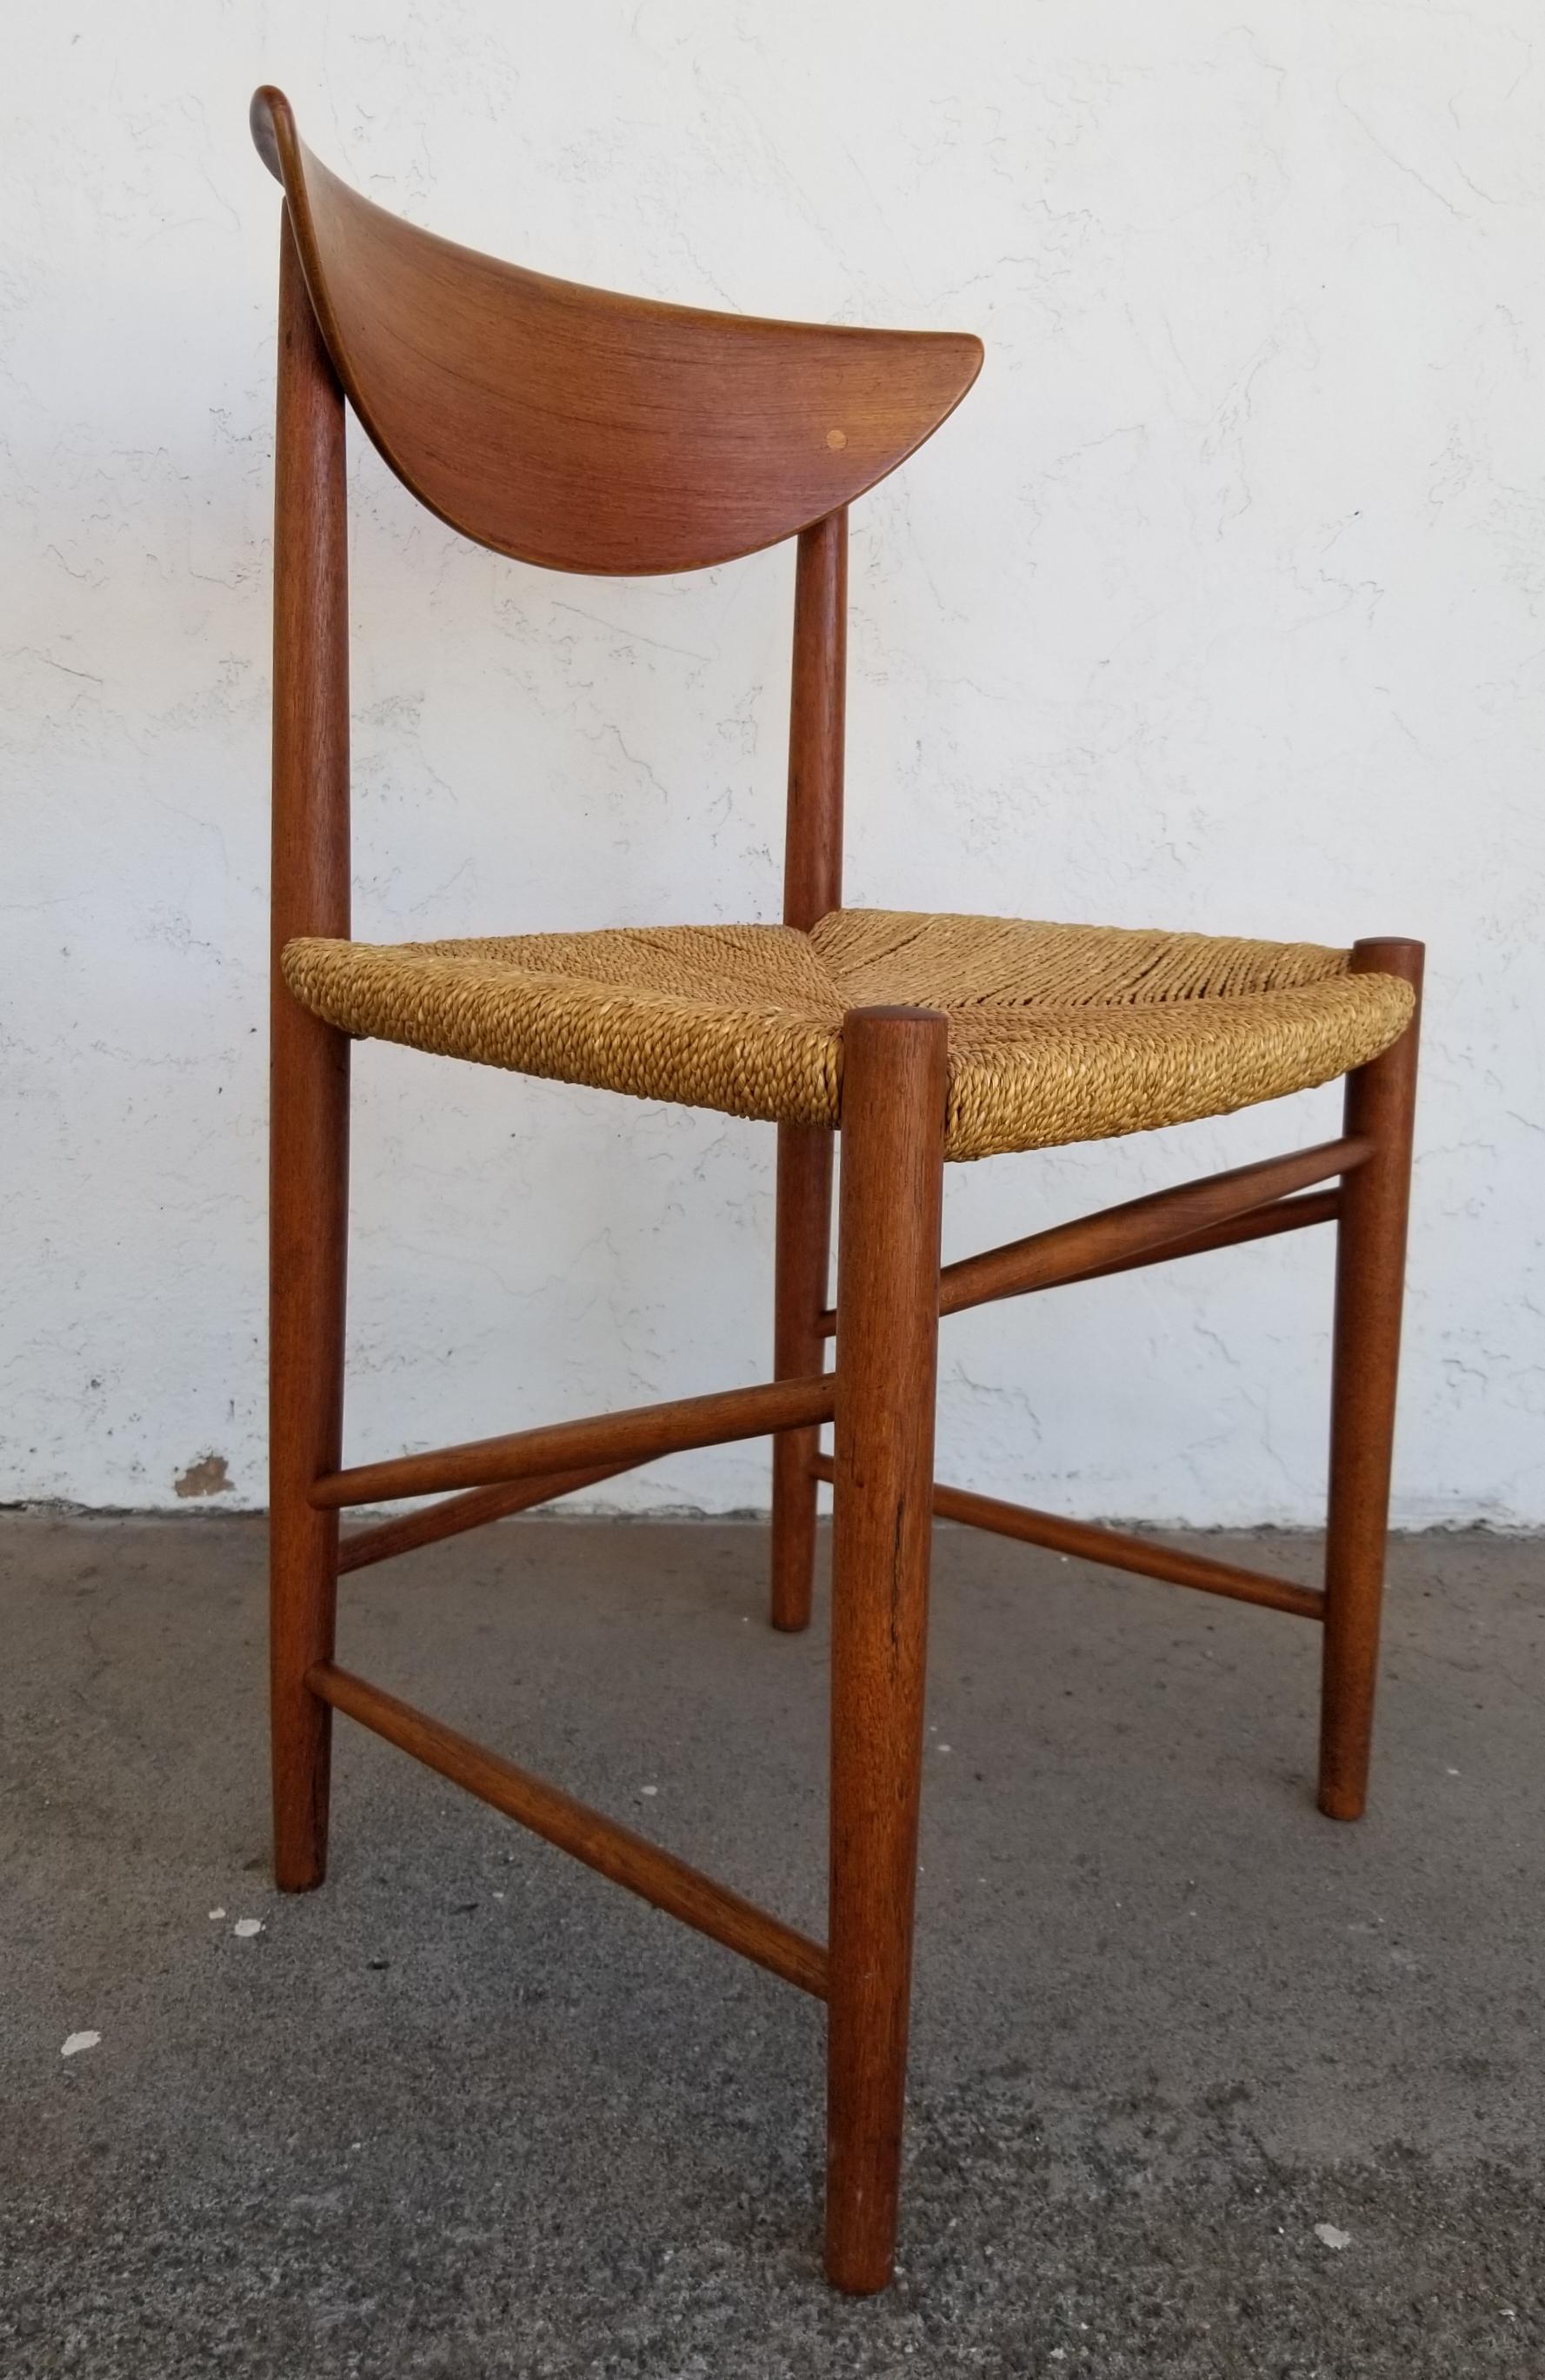 An exceptional set of 10 teak Danish modern dining chairs by Peter Hvidt & Orla Mølgaard-Nielsen. Original finish with wonderful glow to patina. Original grass cord or wicker seats in very good original condition. Set consists of nine side chairs